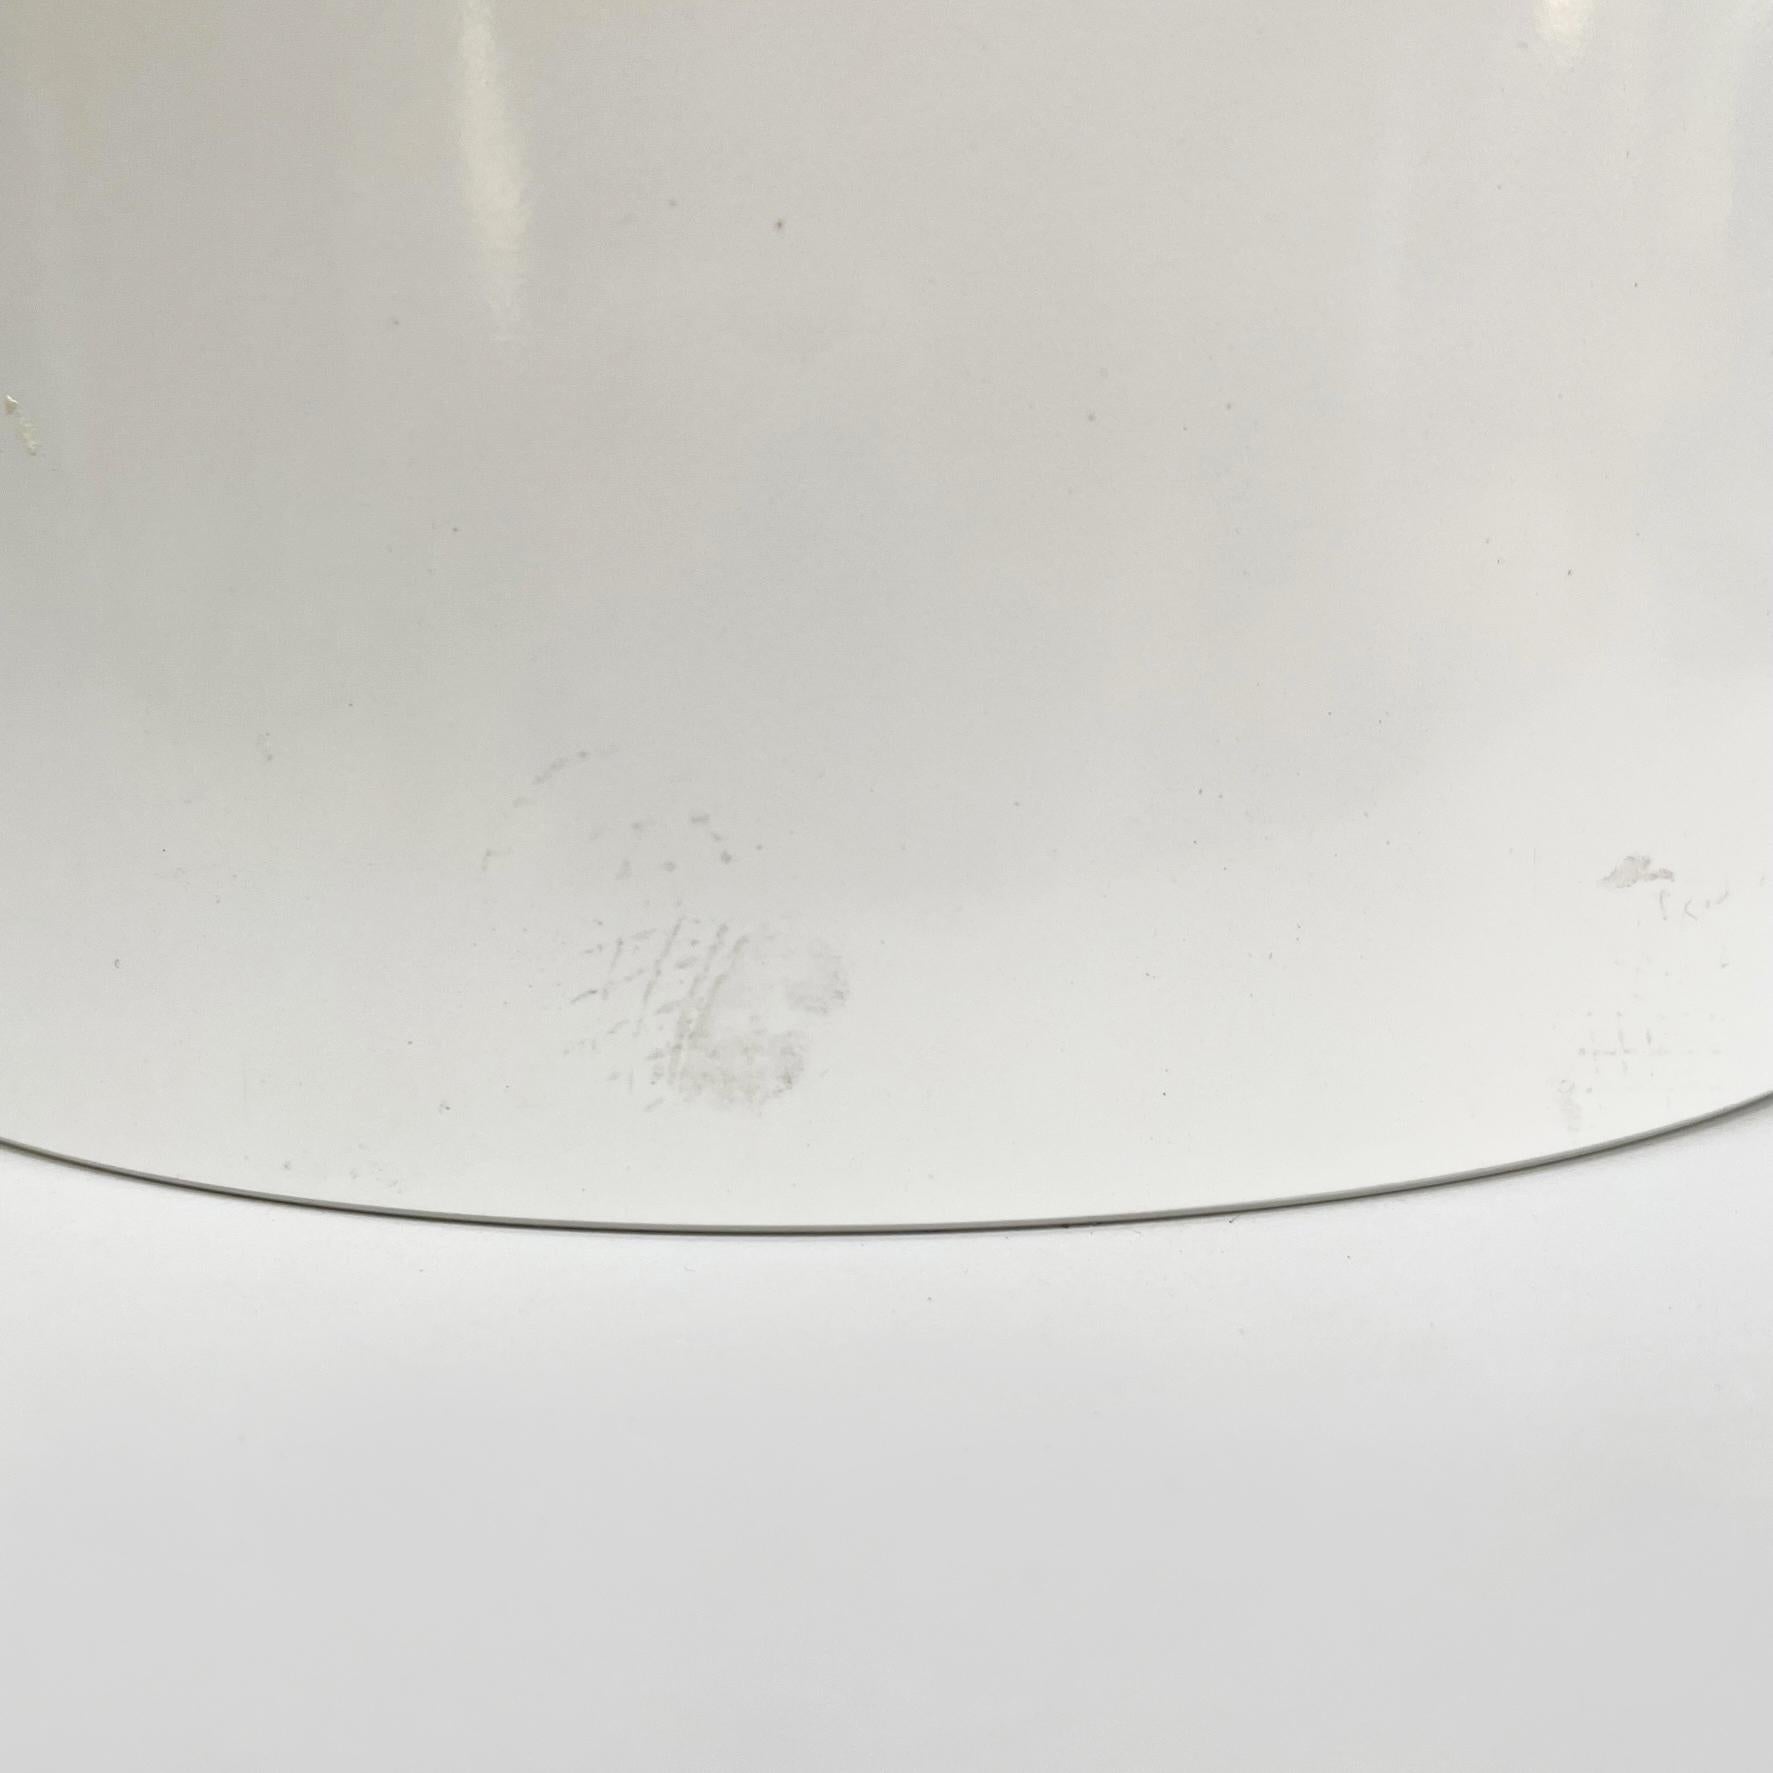 Italian Modern White plastic cylindrical bowl by Enzo Mari for Danese, 1970s For Sale 3